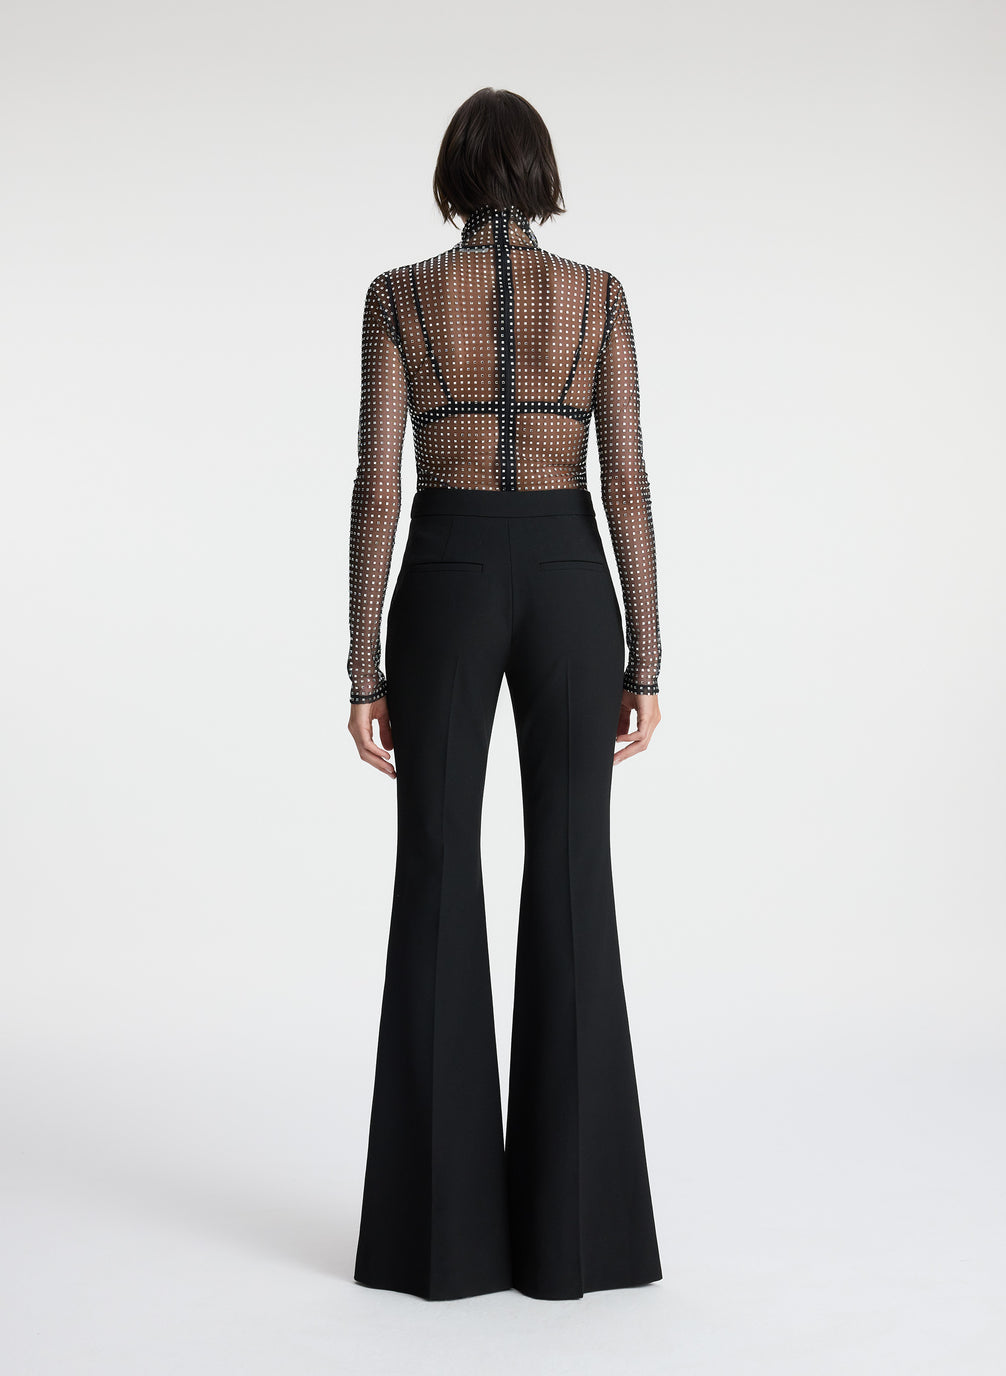 back view of woman wearing sheer black mock neck long sleeve with allover rhinestone embellishment and black pants